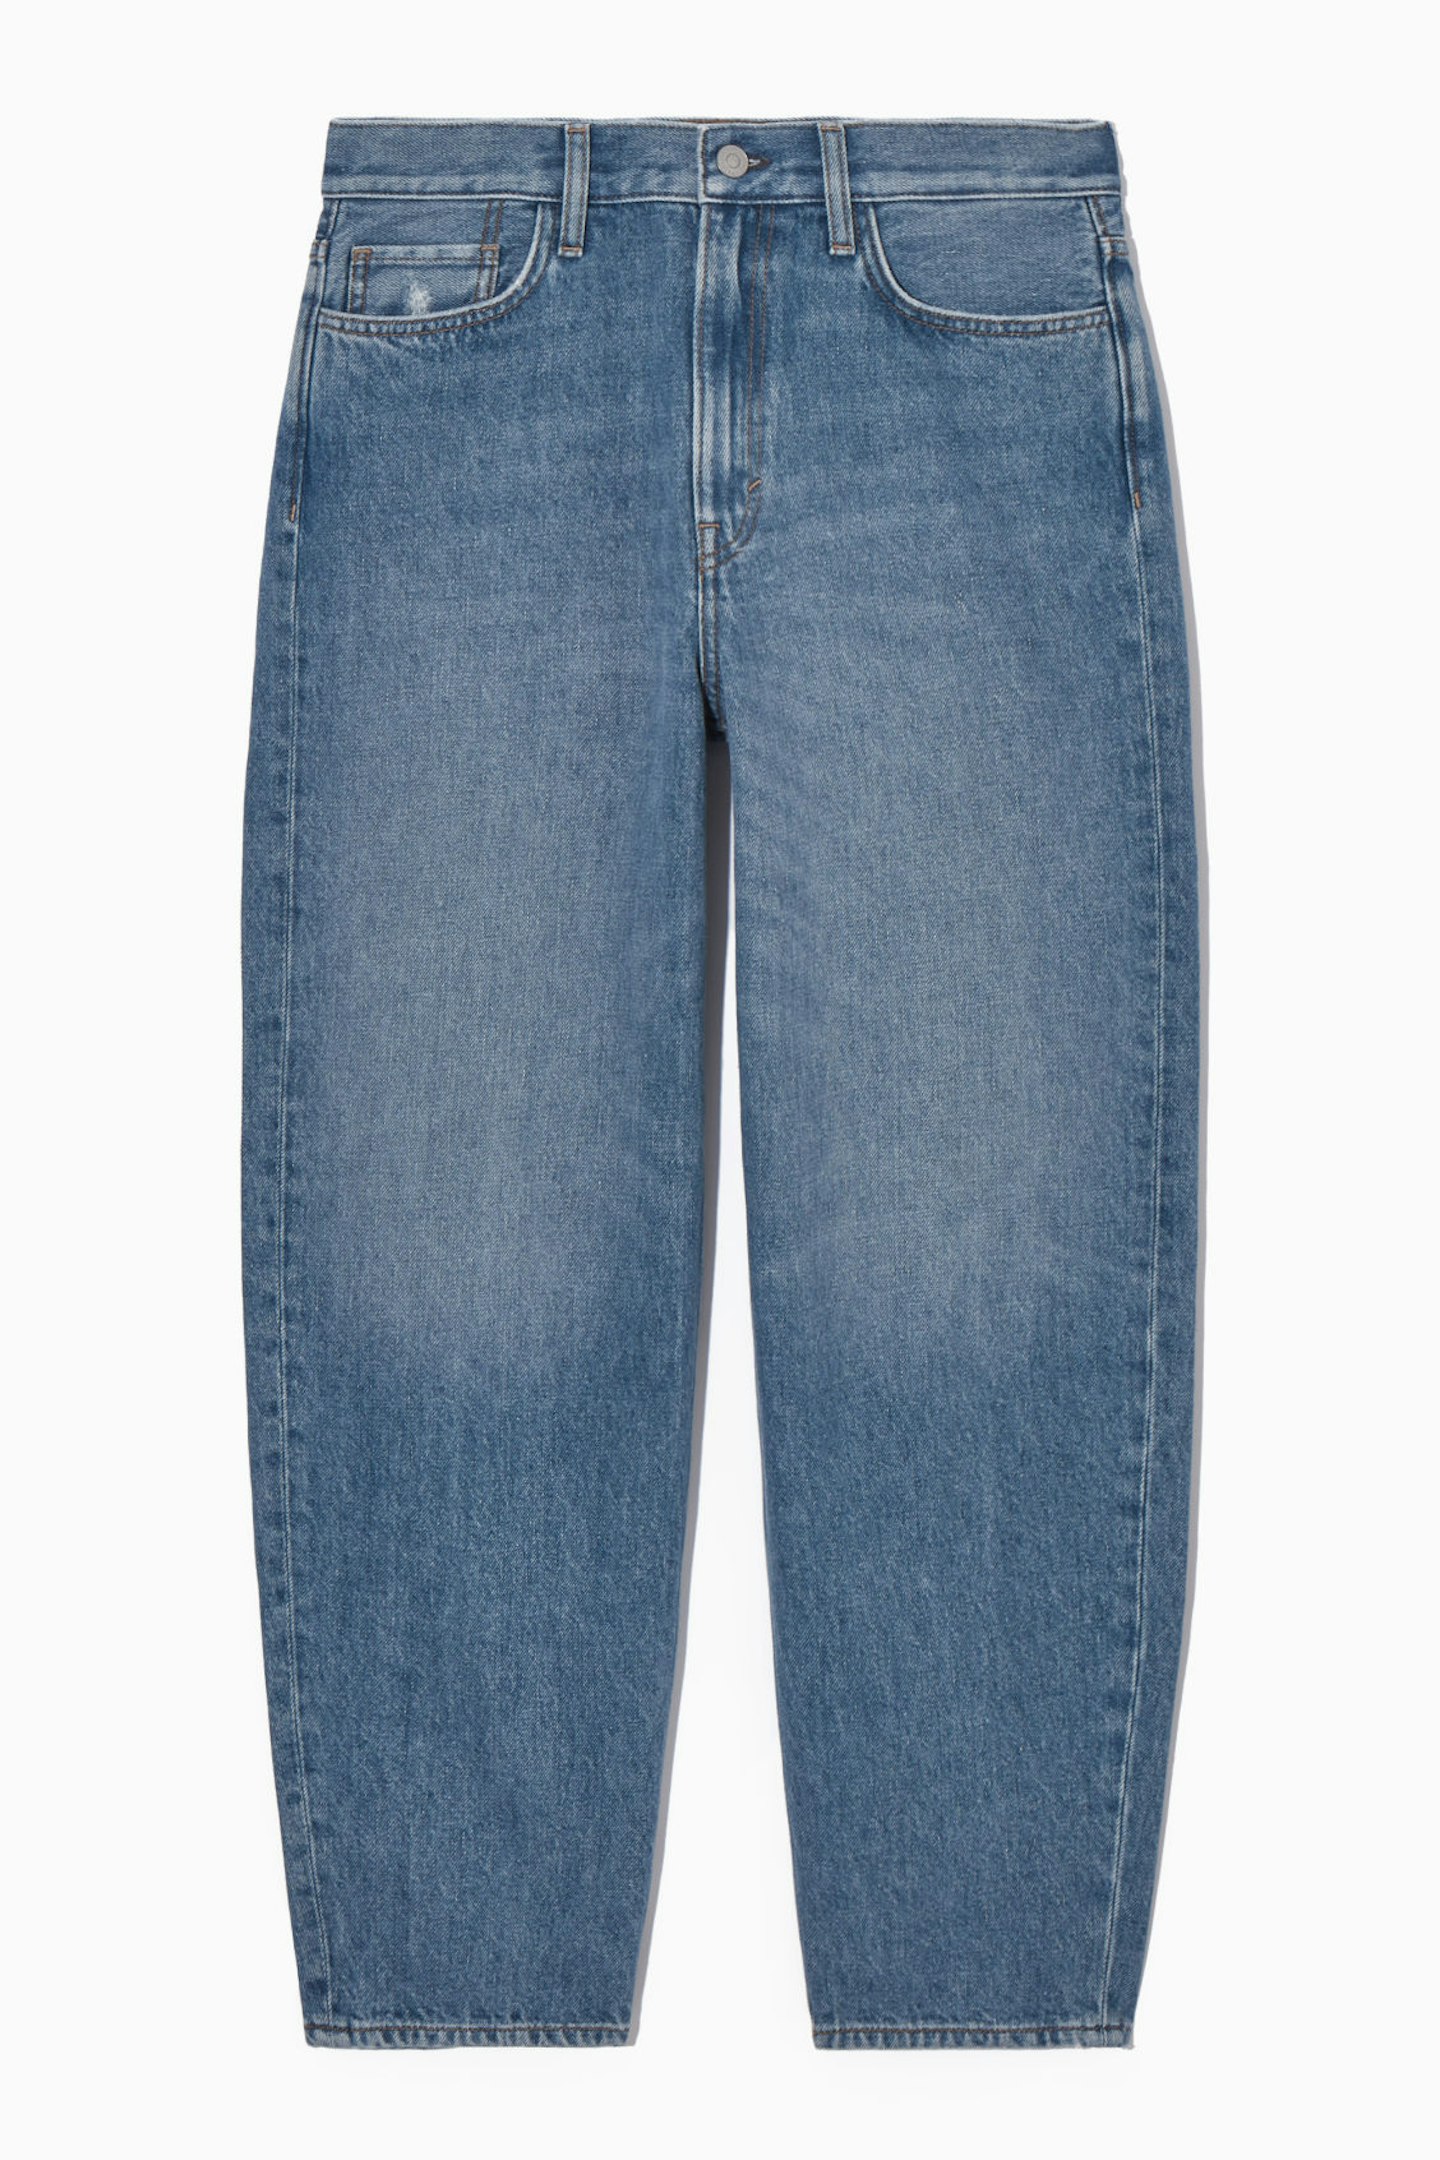 COS, Tapered Arch Jeans